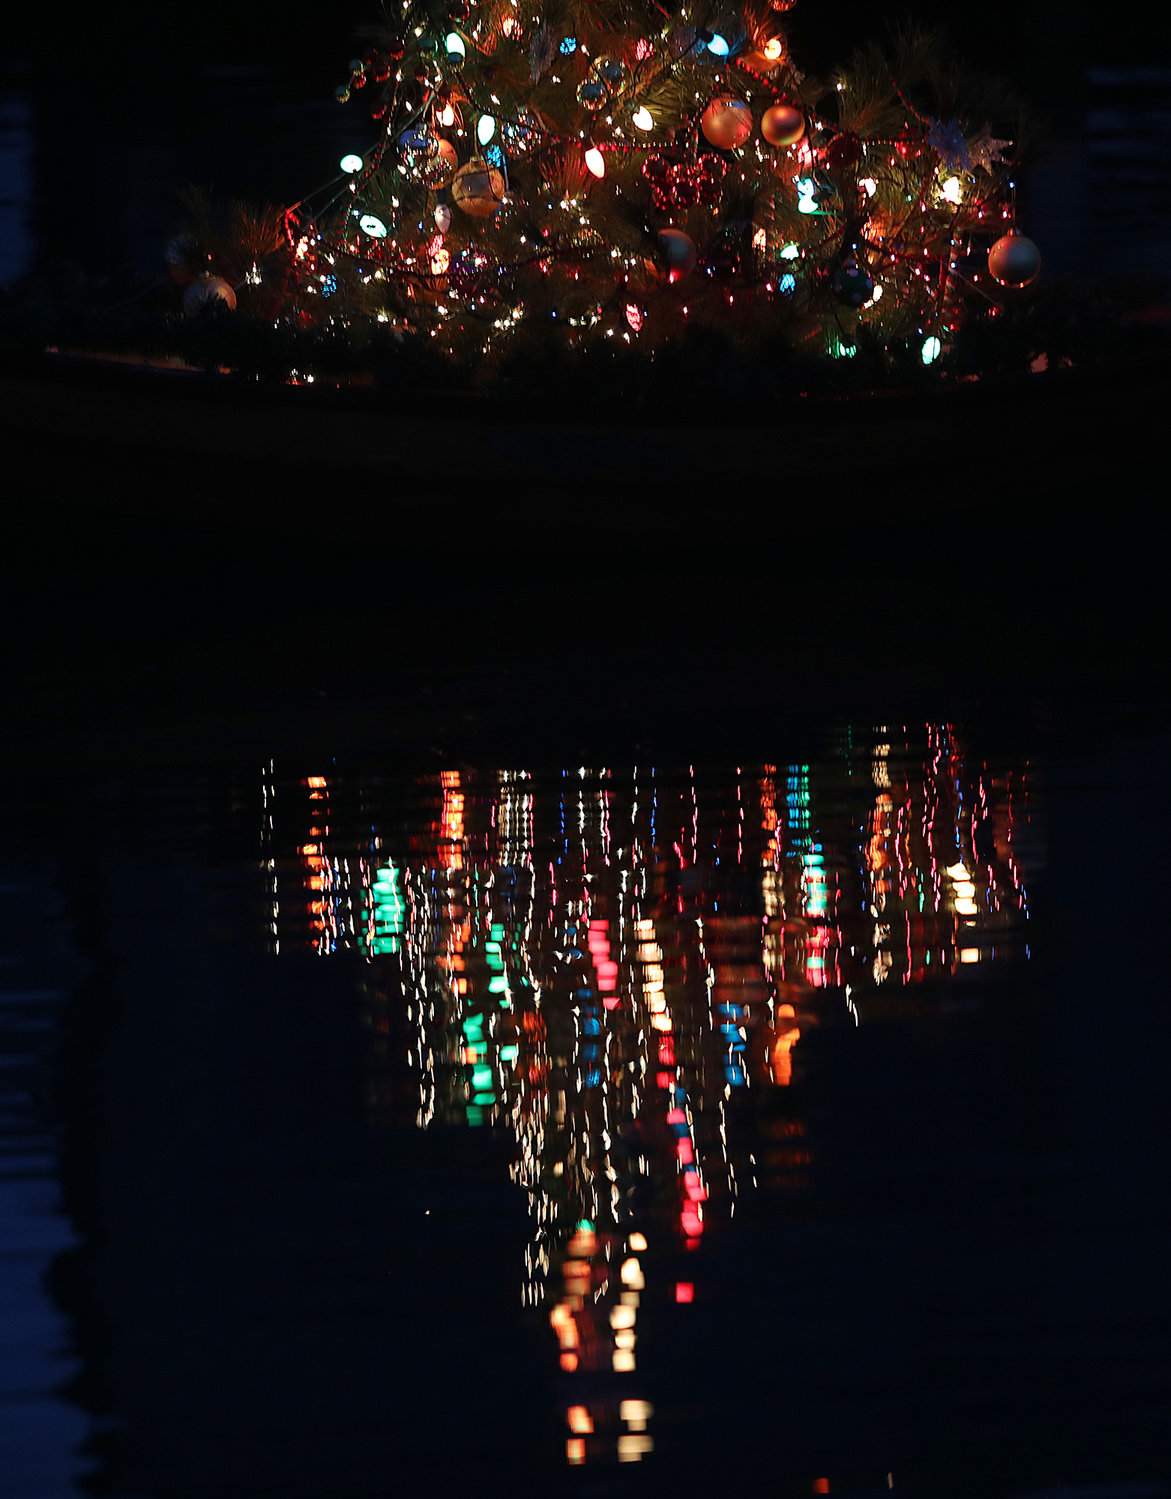 The Christmas Dory and reflections.